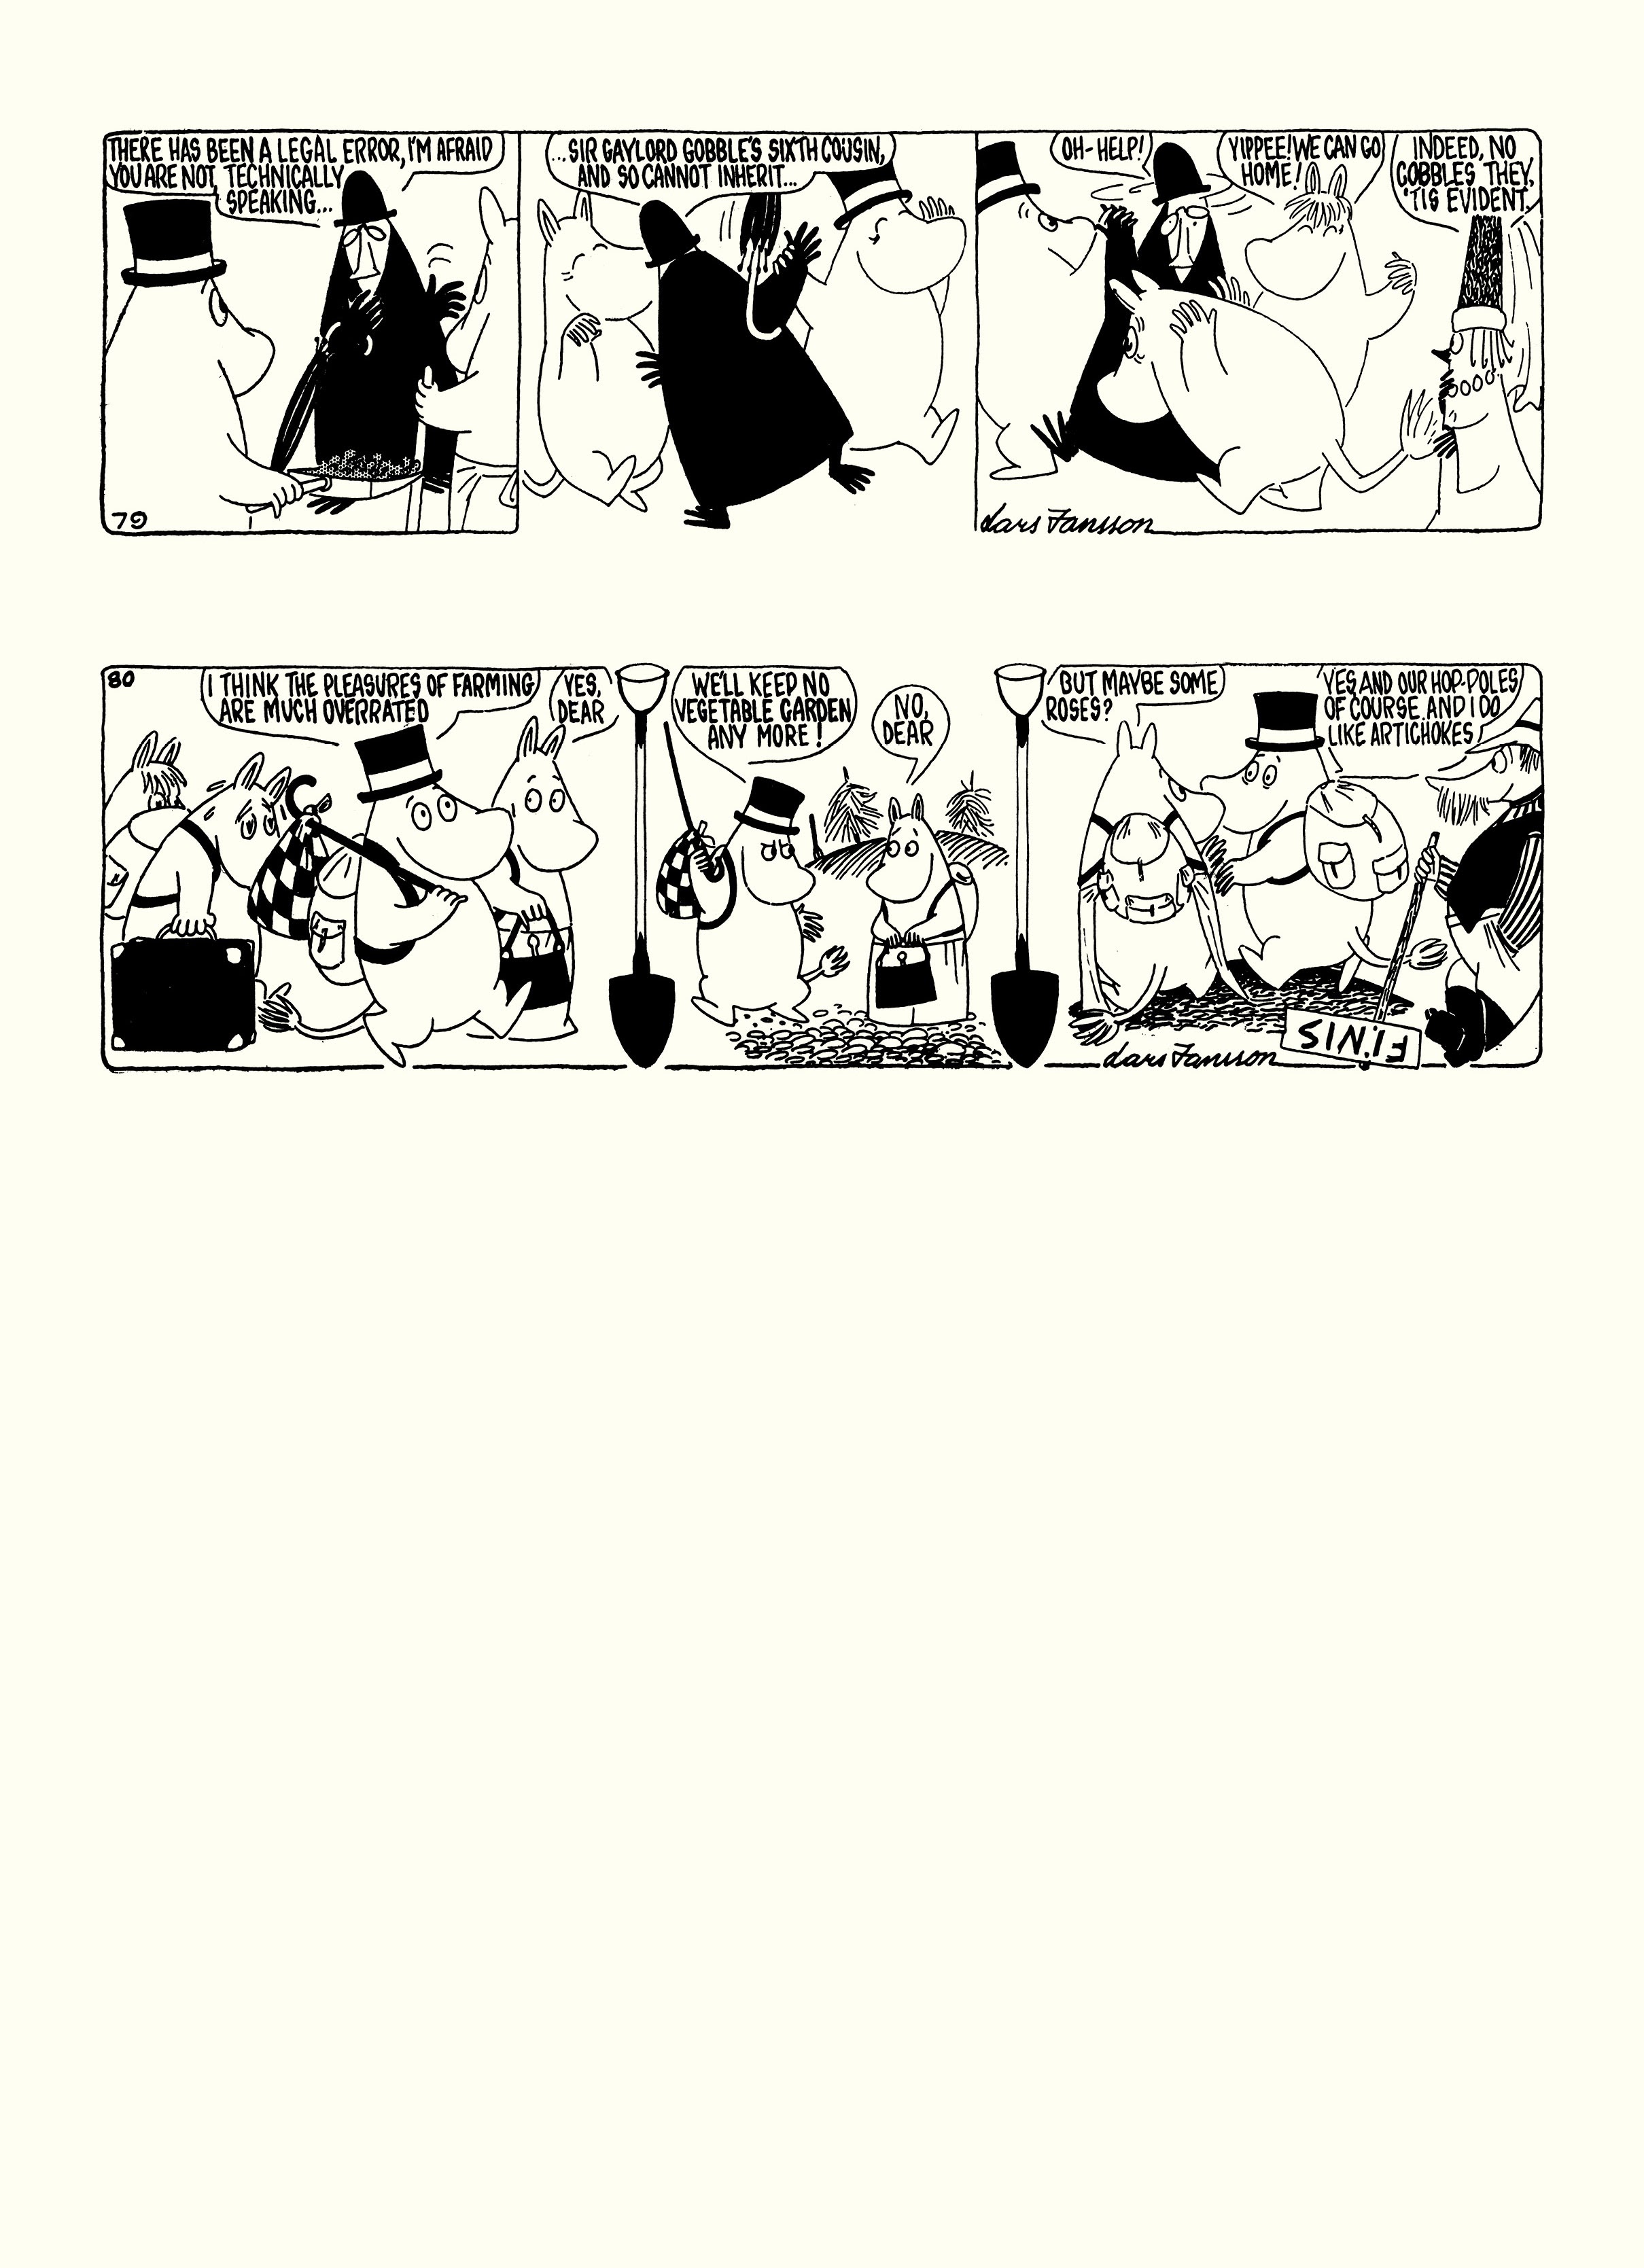 Read online Moomin: The Complete Lars Jansson Comic Strip comic -  Issue # TPB 7 - 68